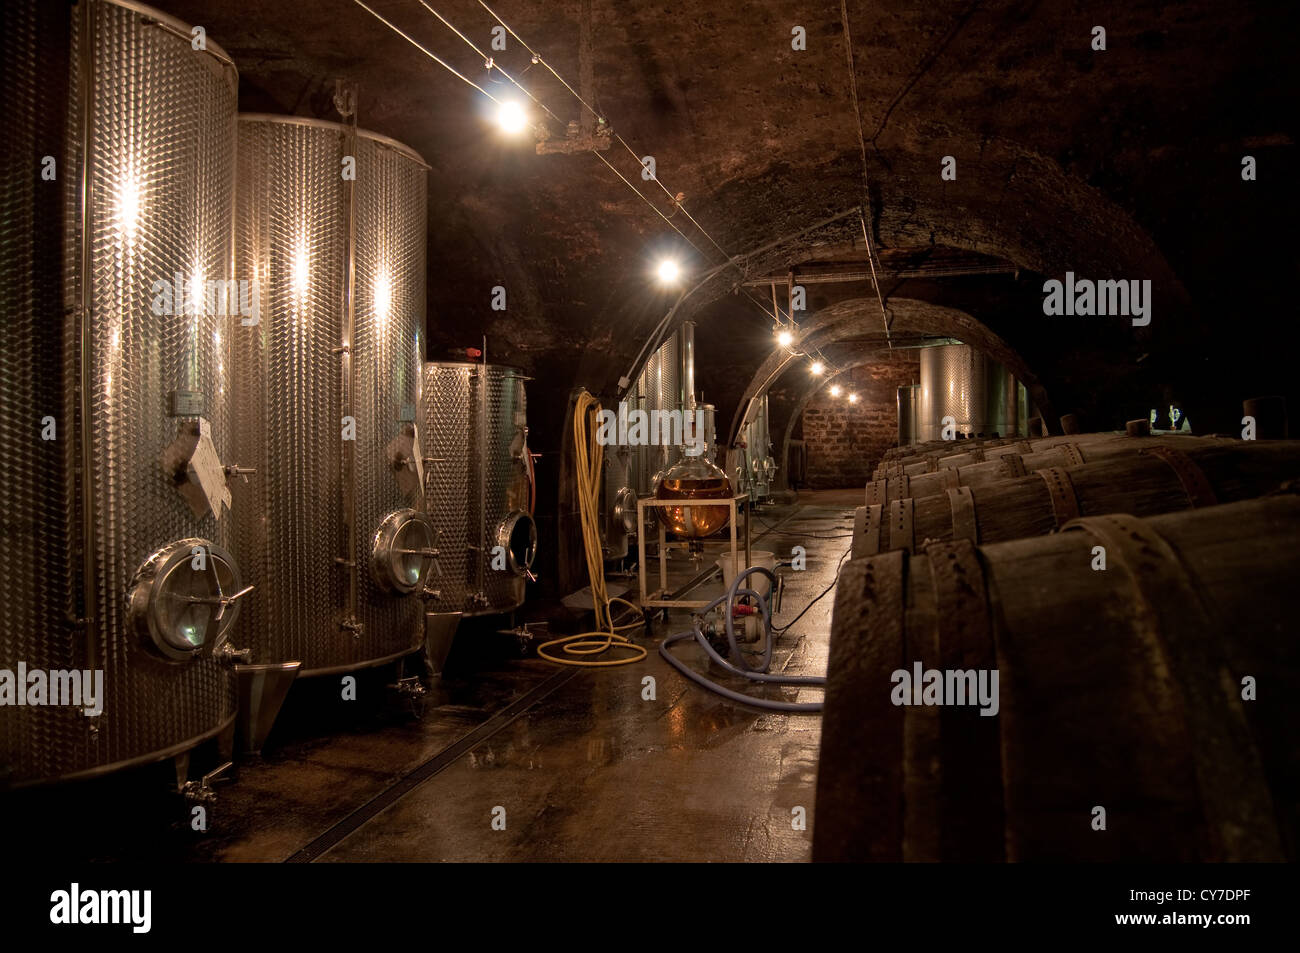 Old wine-cellar with barrels and stainless tanks Stock Photo